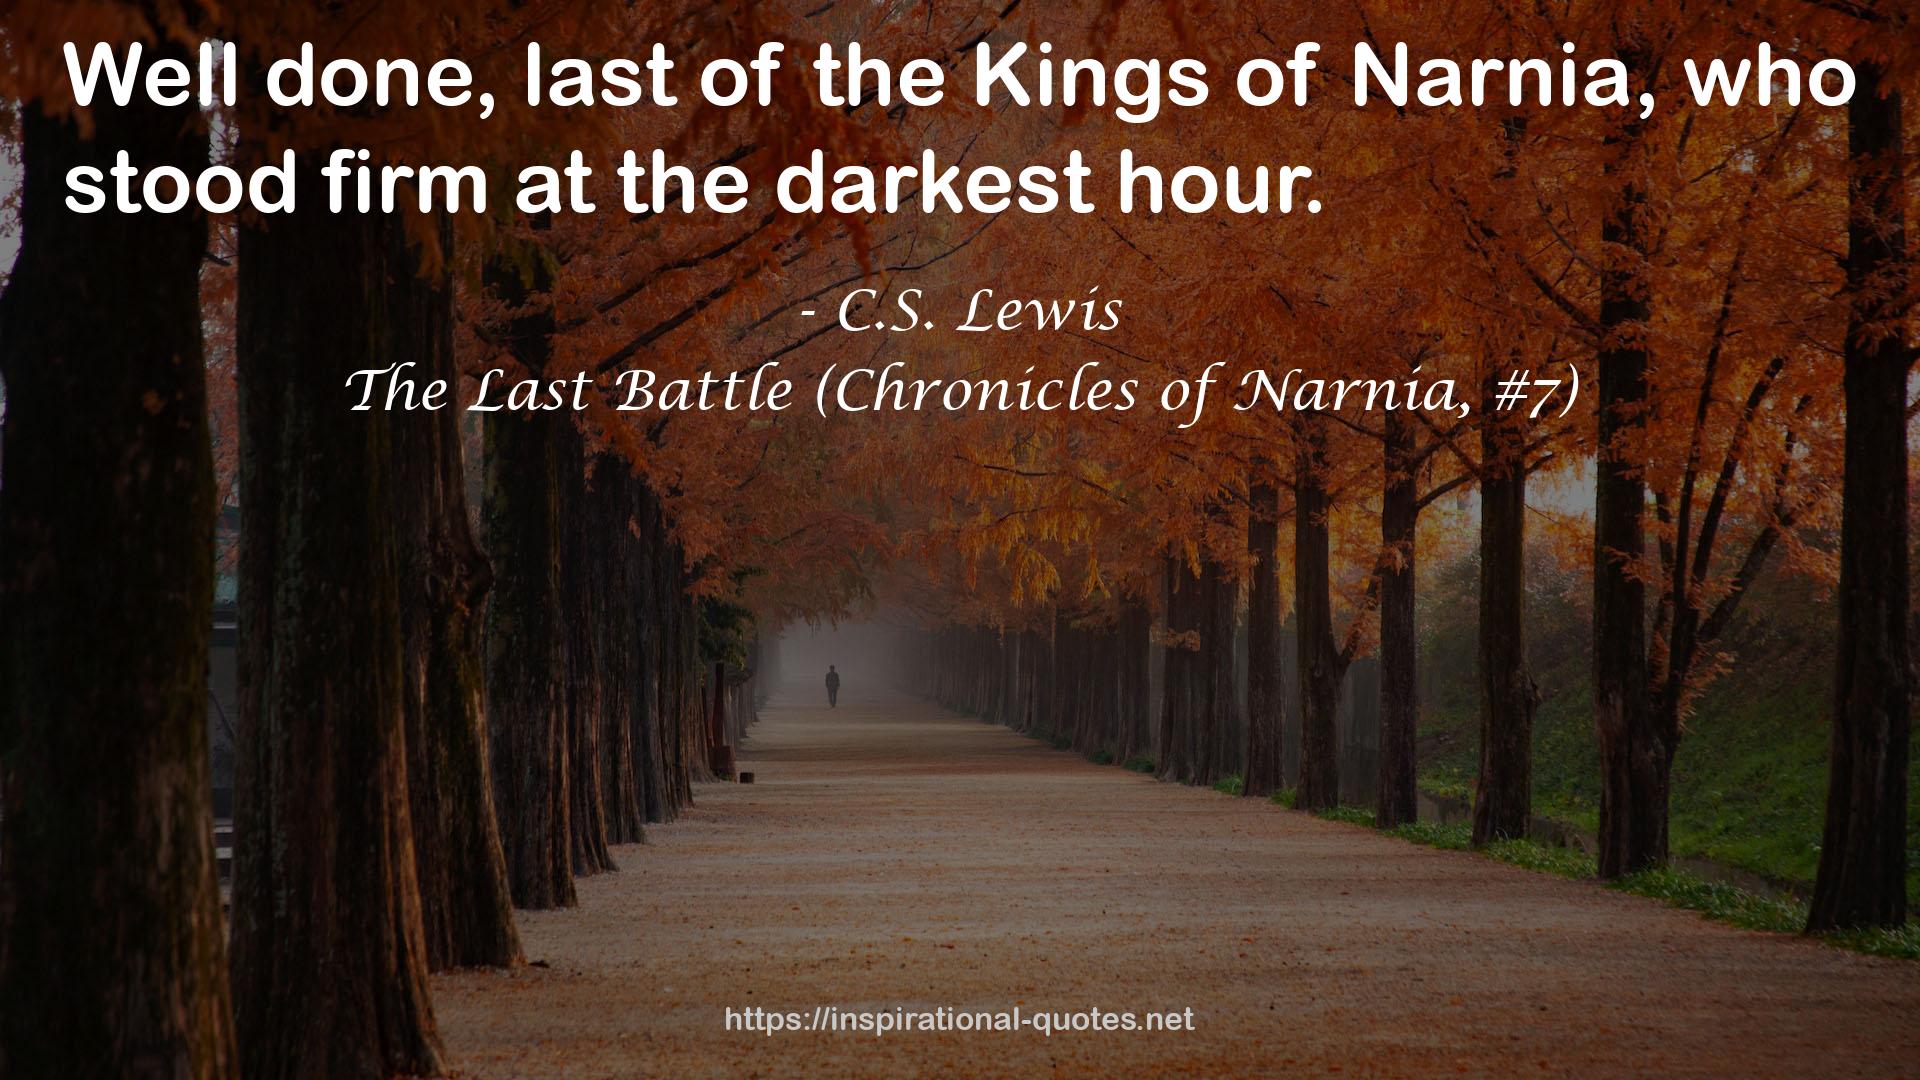 The Last Battle (Chronicles of Narnia, #7) QUOTES